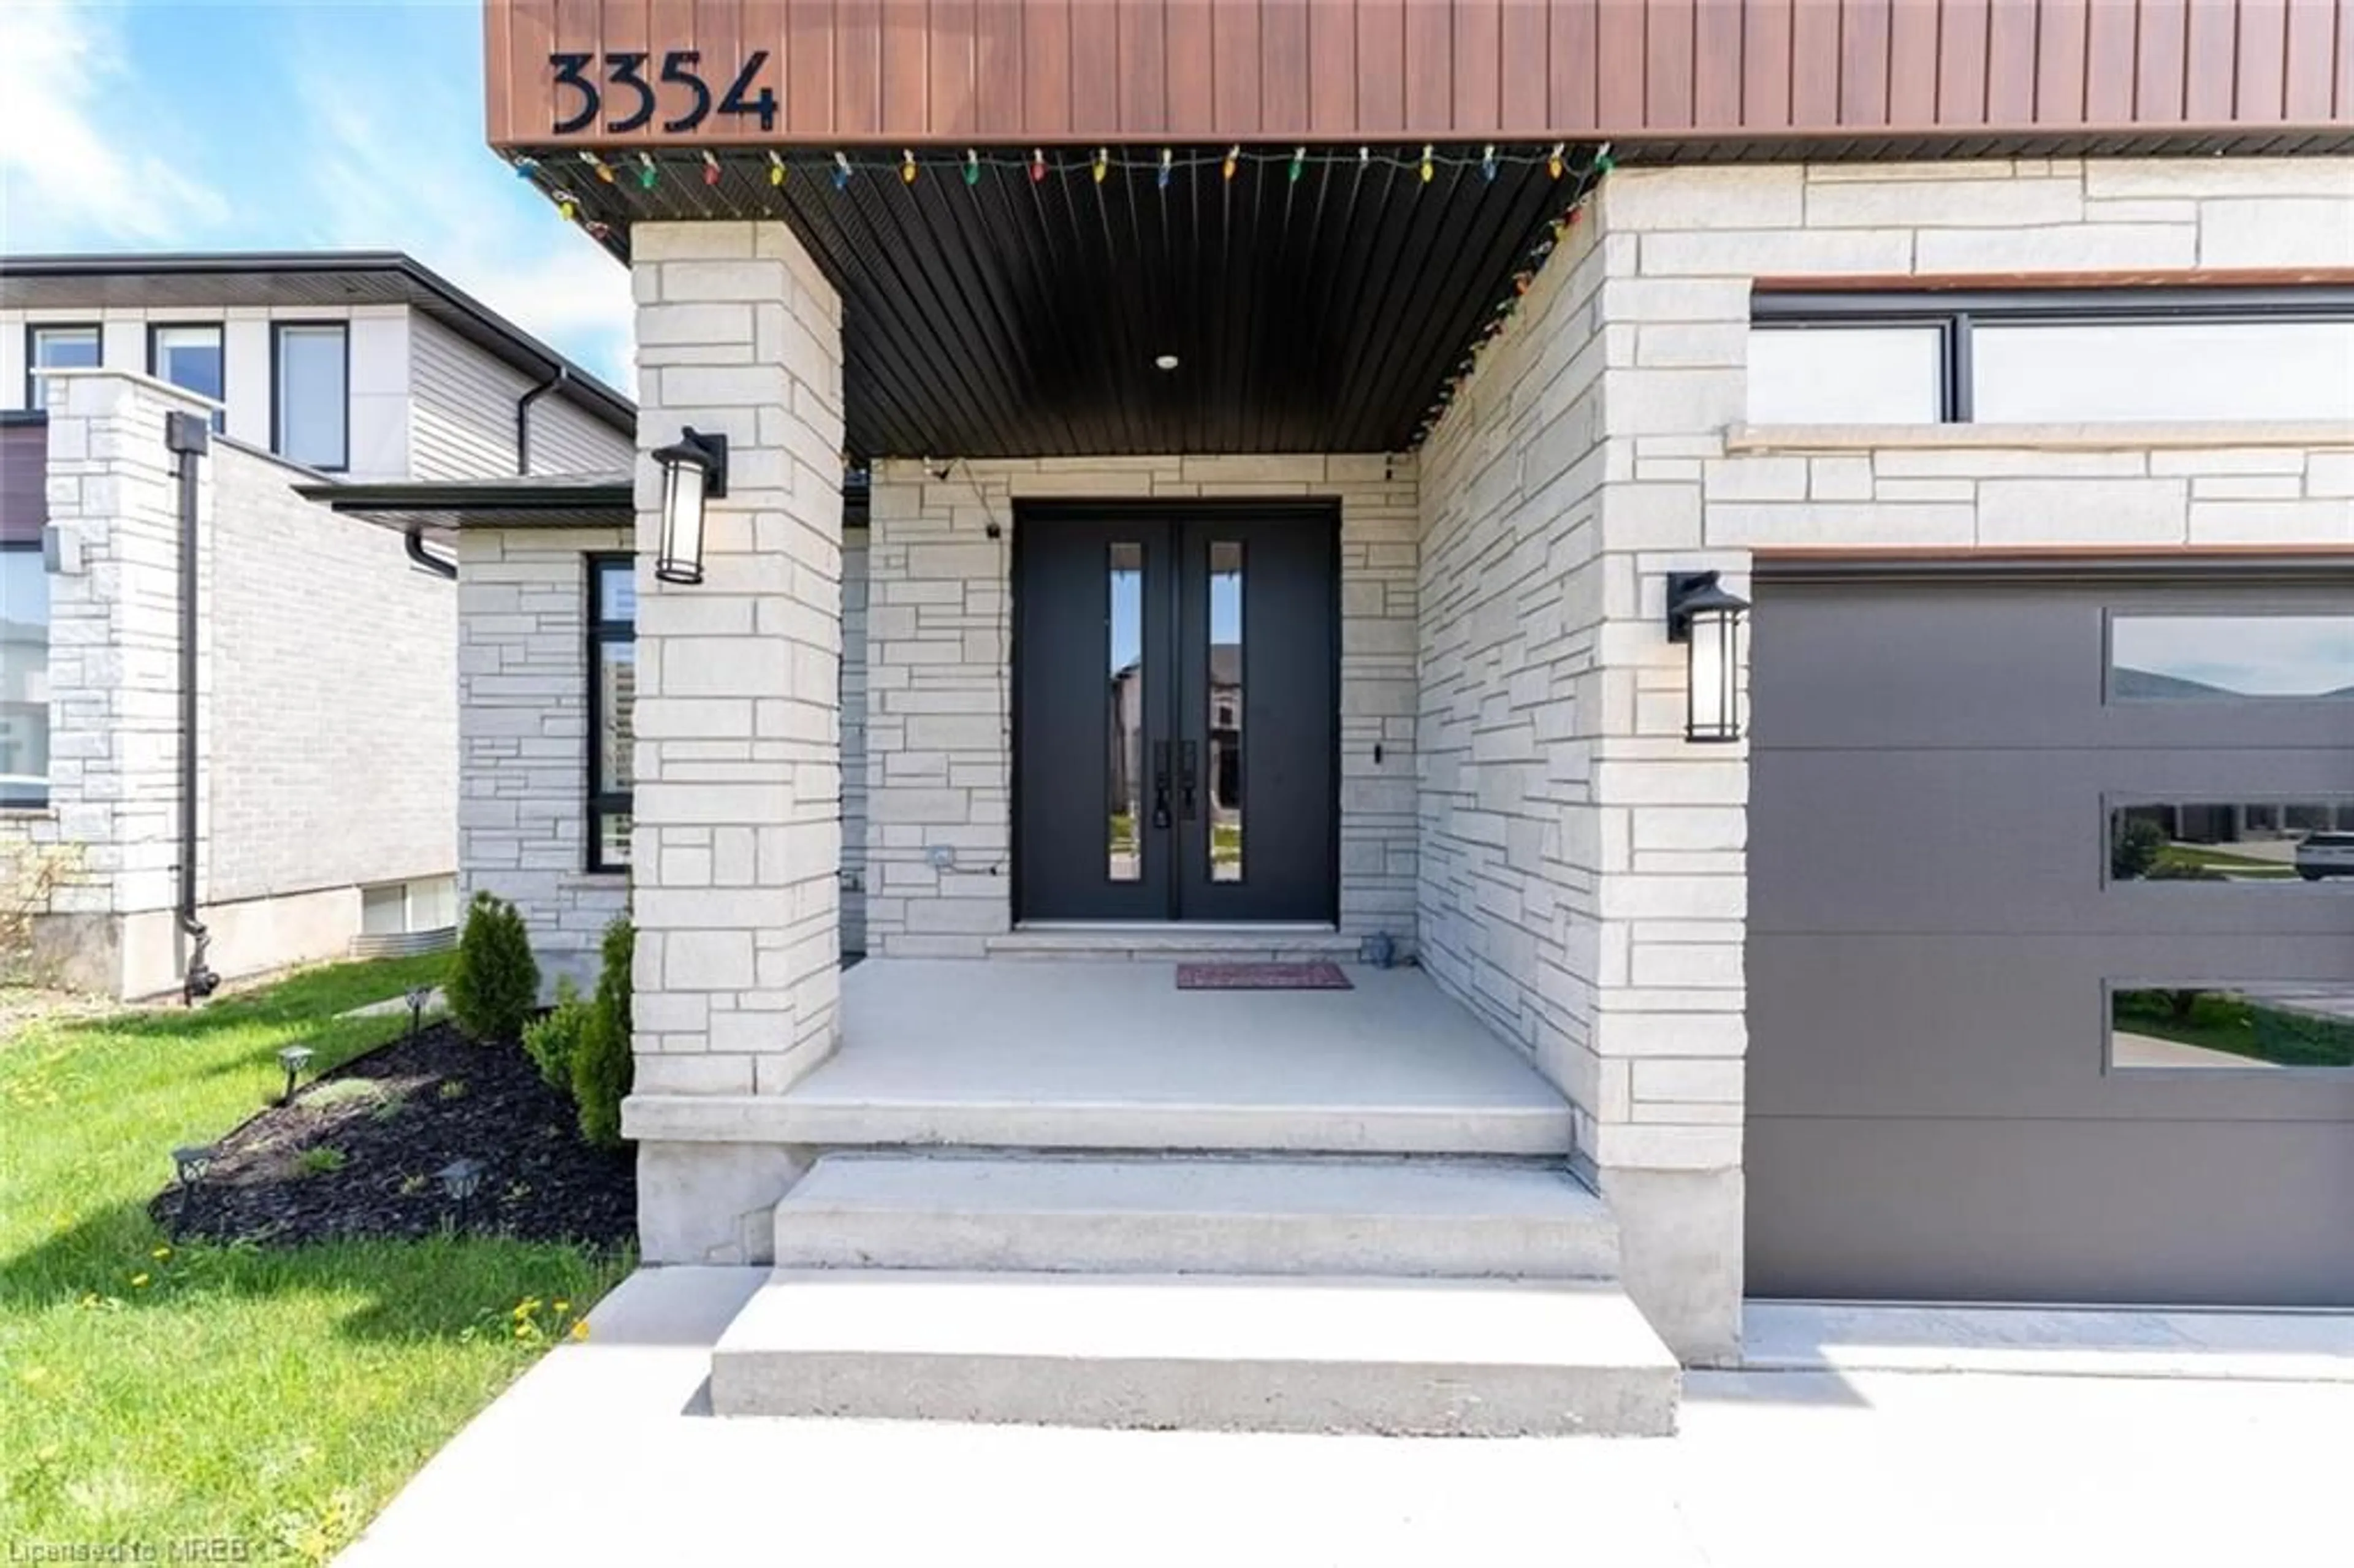 Home with brick exterior material for 3354 Mersea St, London Ontario N6P 0G3